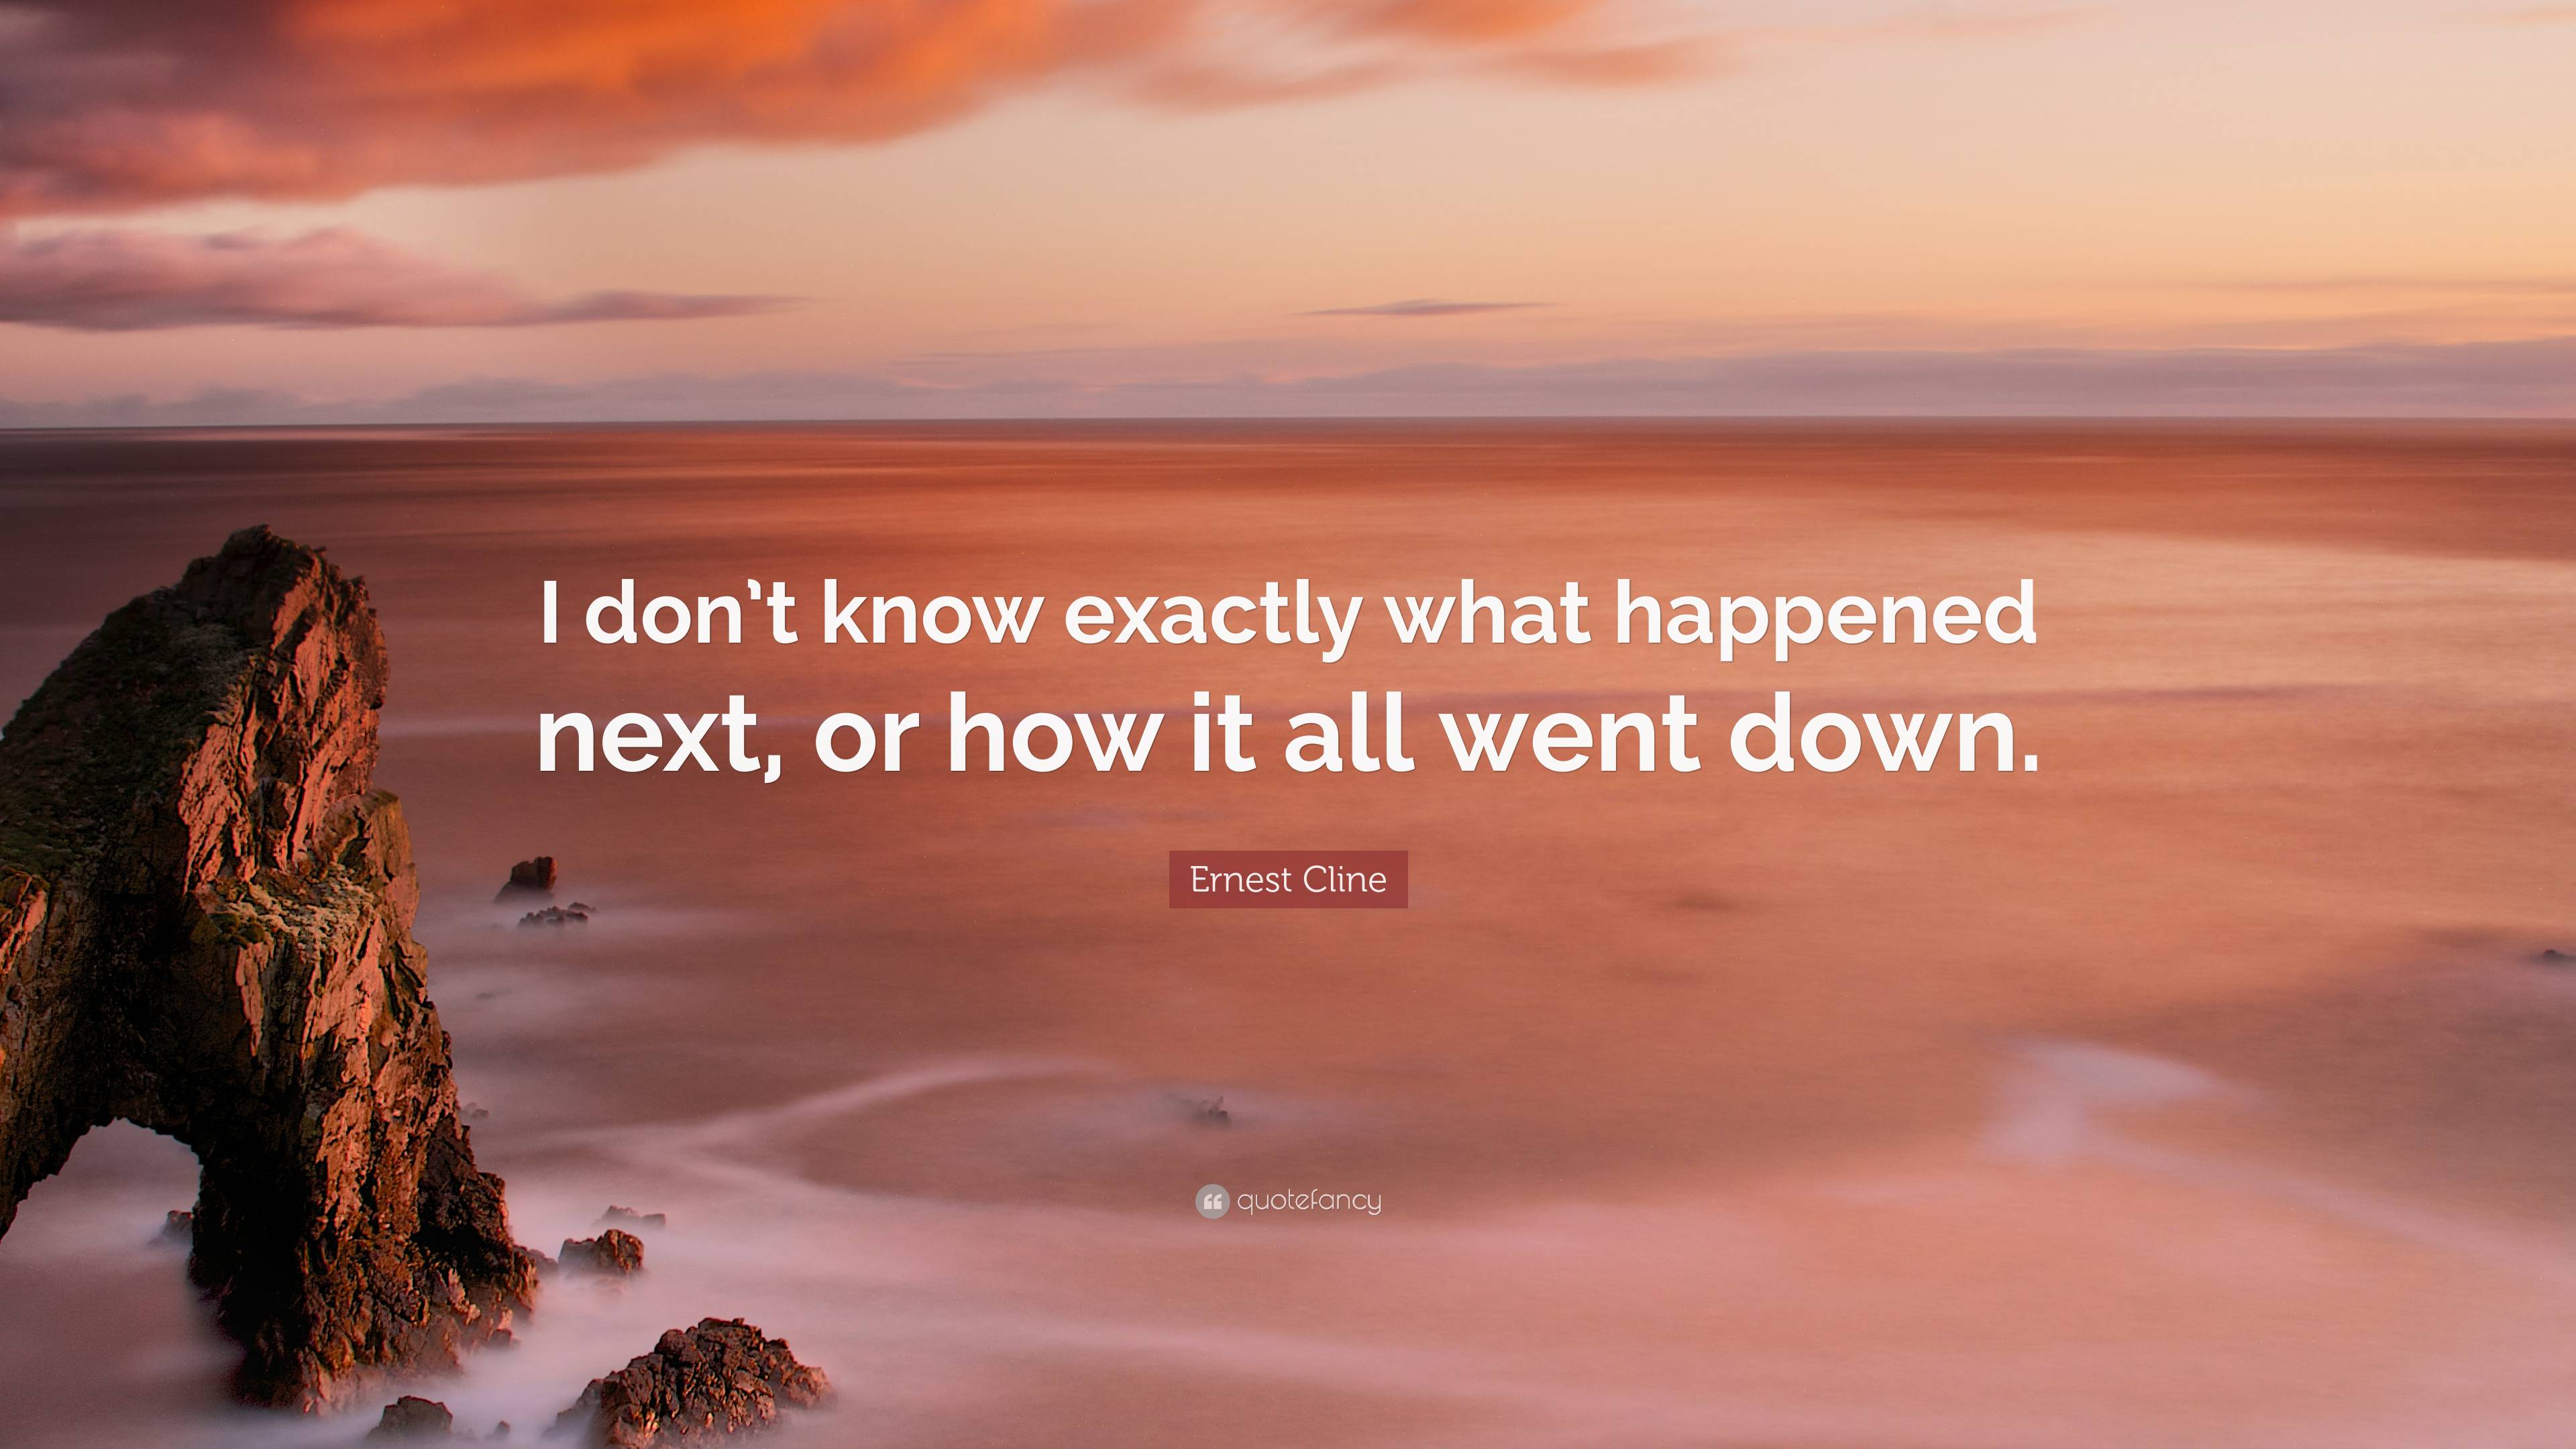 https://quotefancy.com/media/wallpaper/3840x2160/7069803-Ernest-Cline-Quote-I-don-t-know-exactly-what-happened-next-or-how.jpg